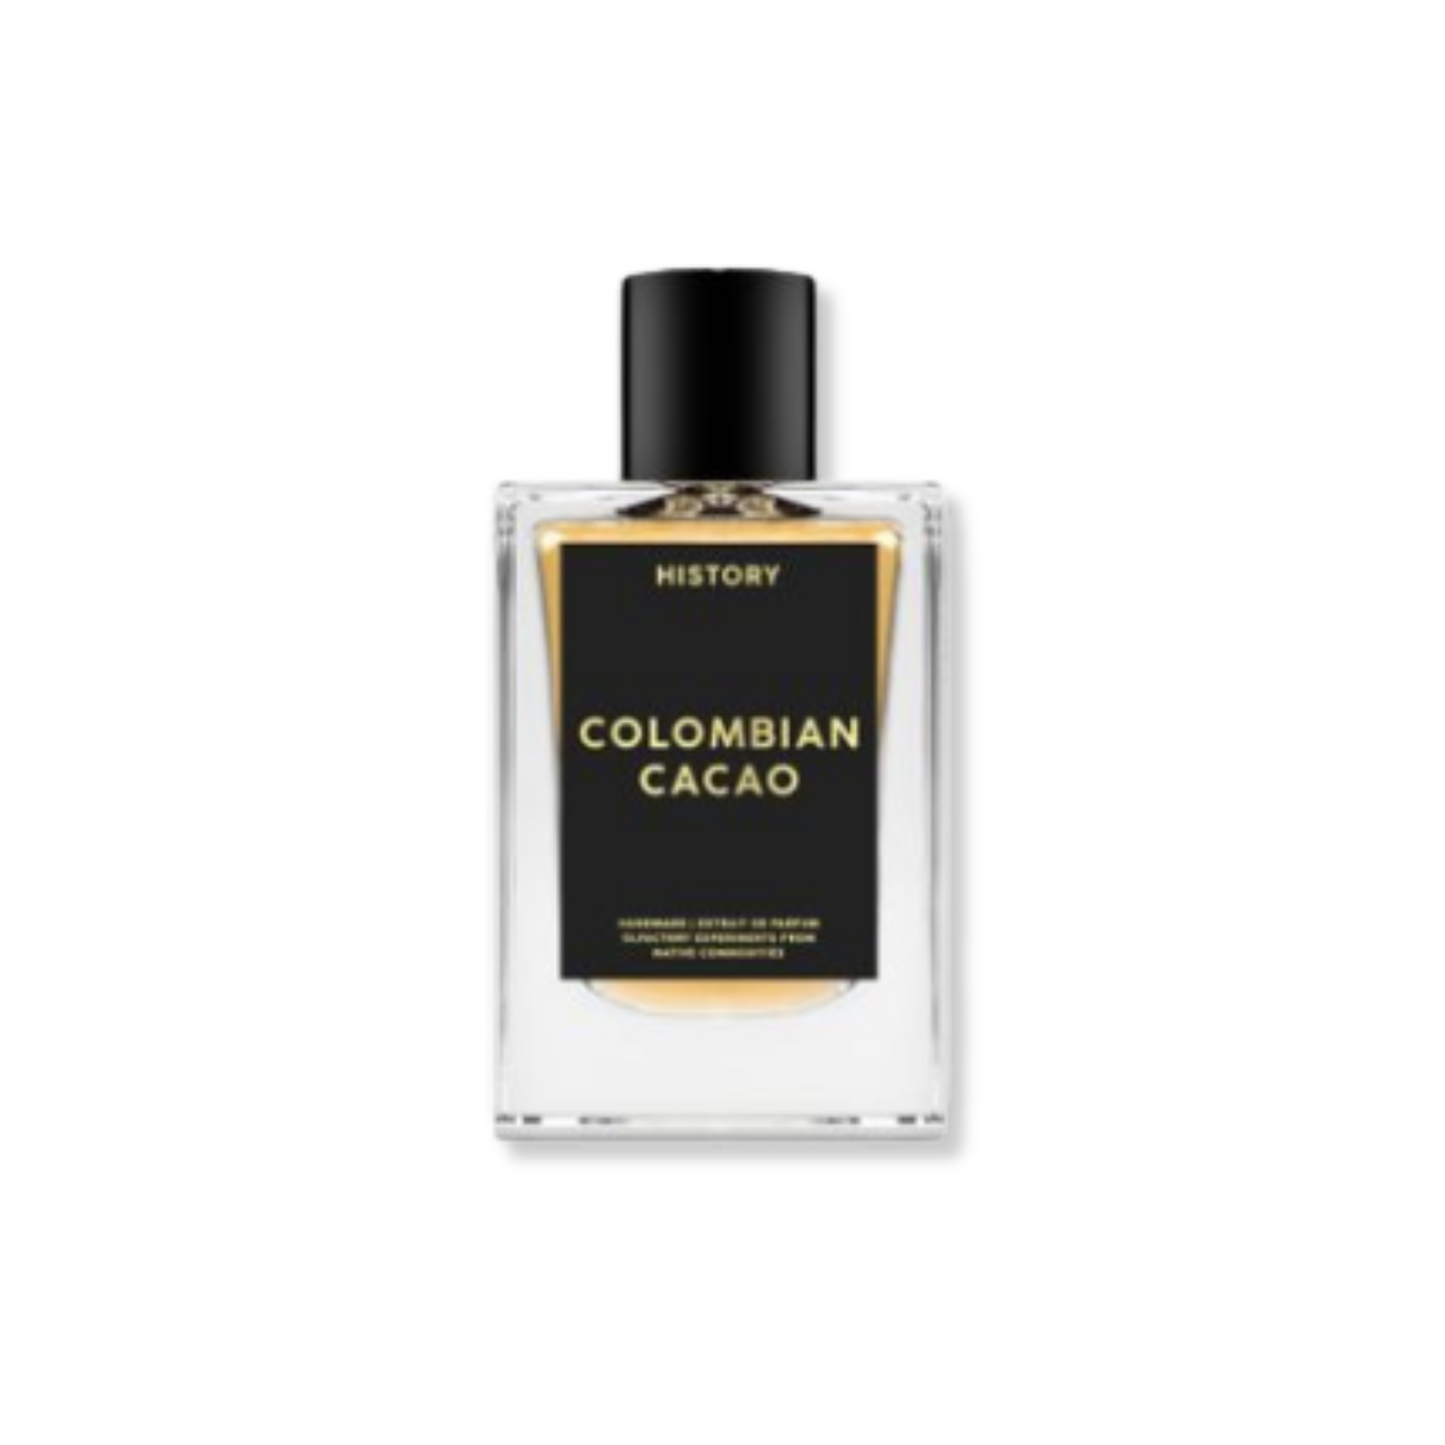 COLOMBIAN CACAO, 30ML